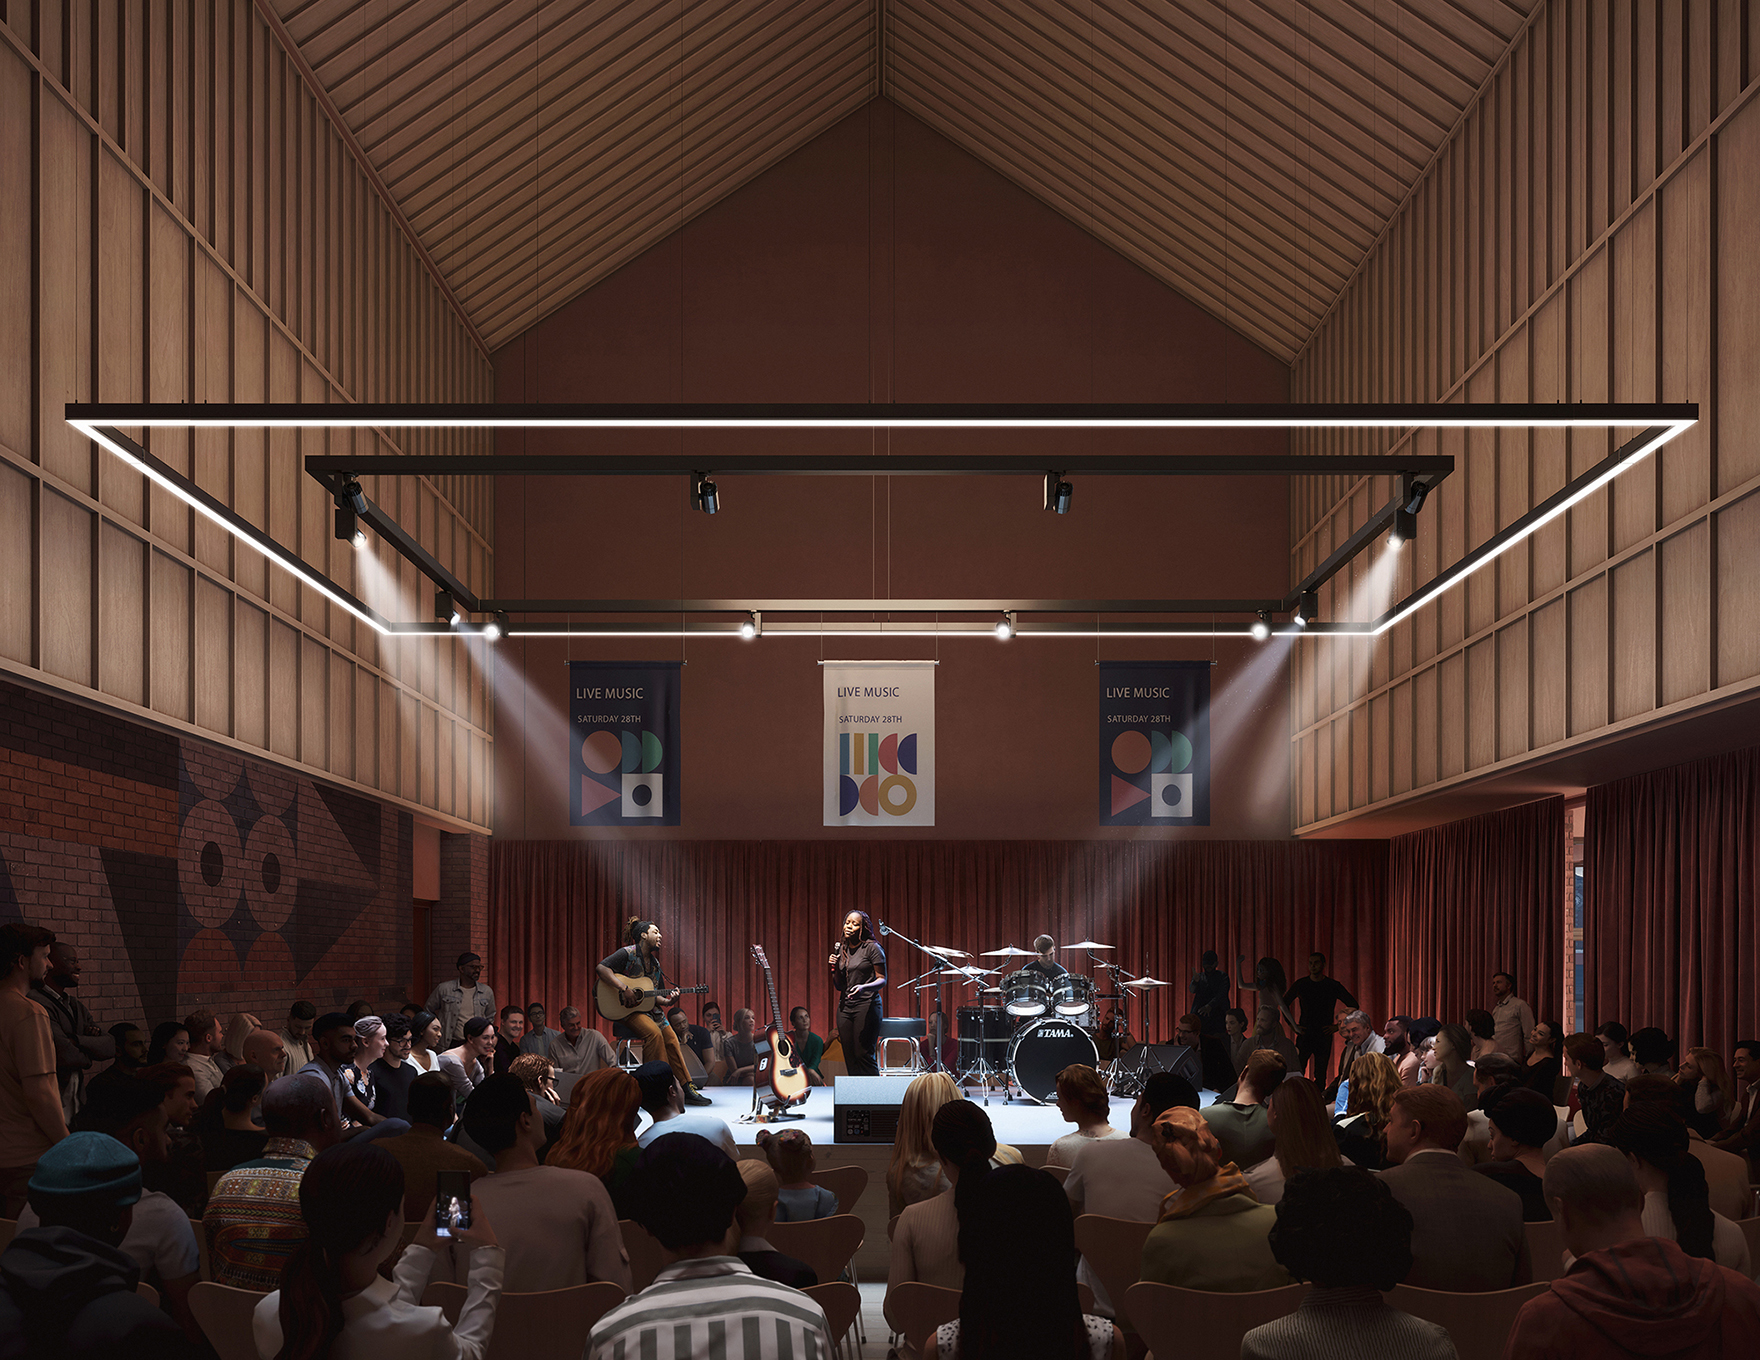 Blyth Cultural Venue Market Place Planning Approval Studio Performance Faulknerbrowns Architects L